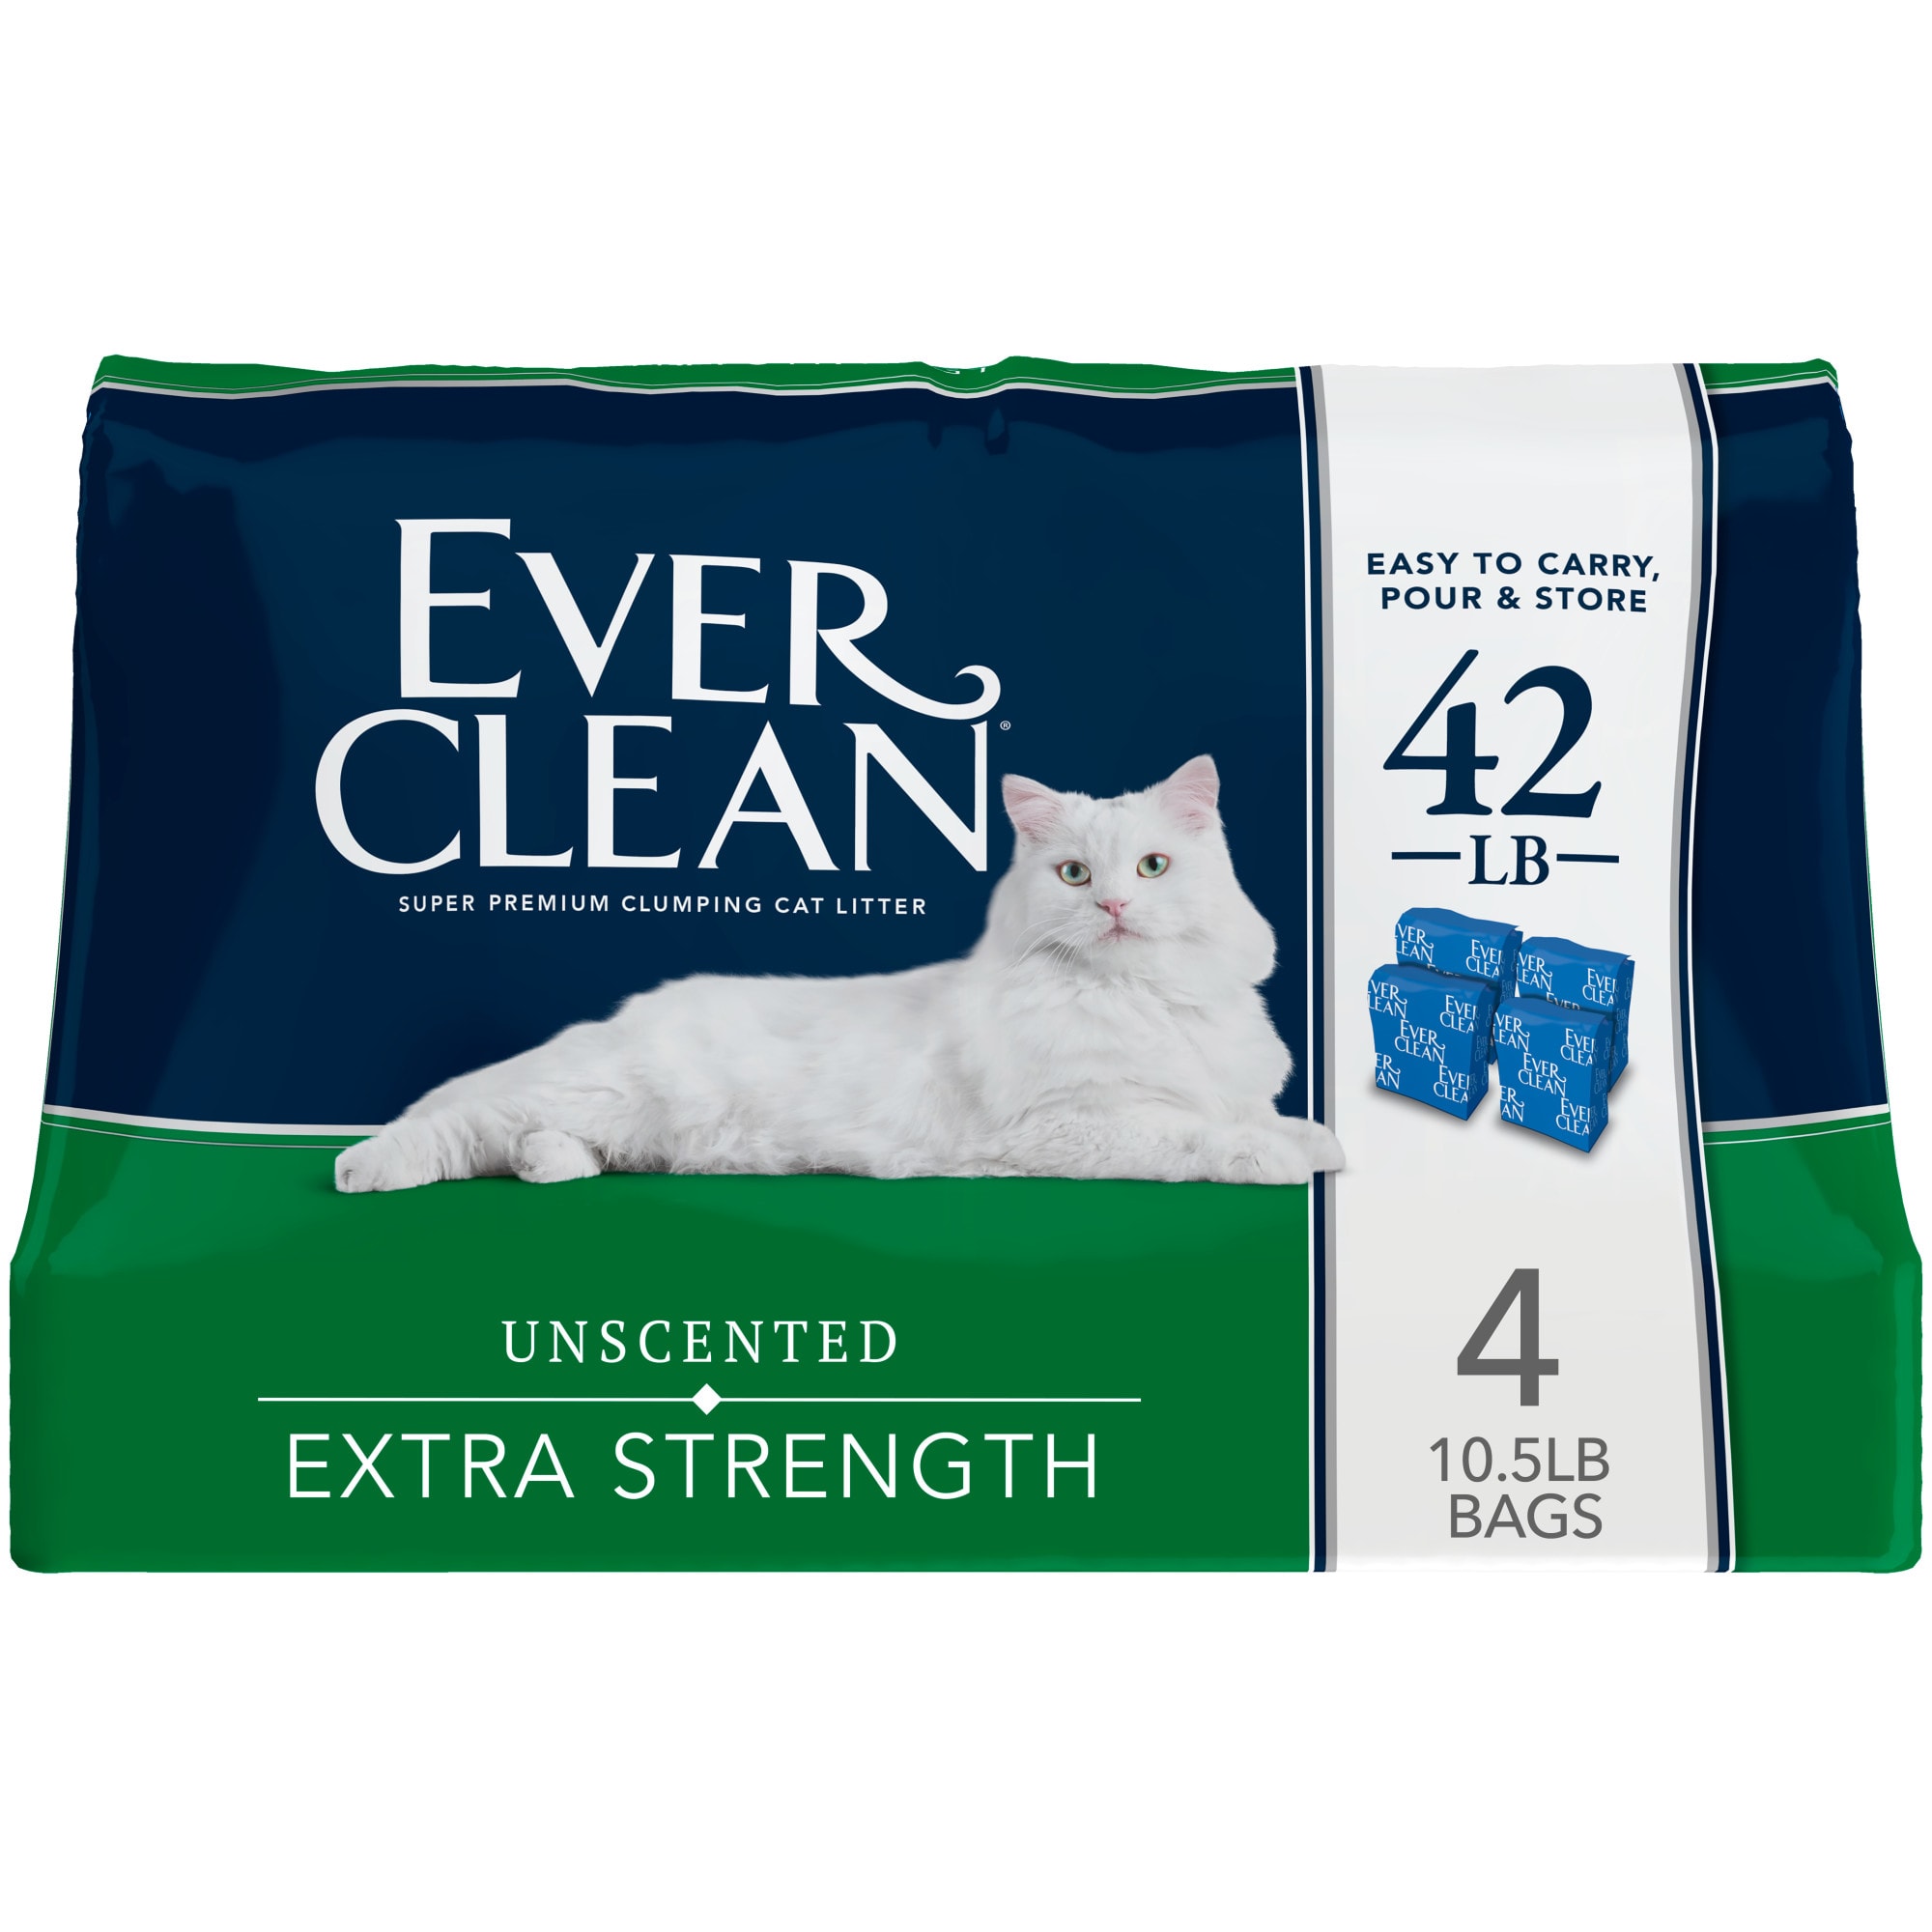 how to clean cat litter